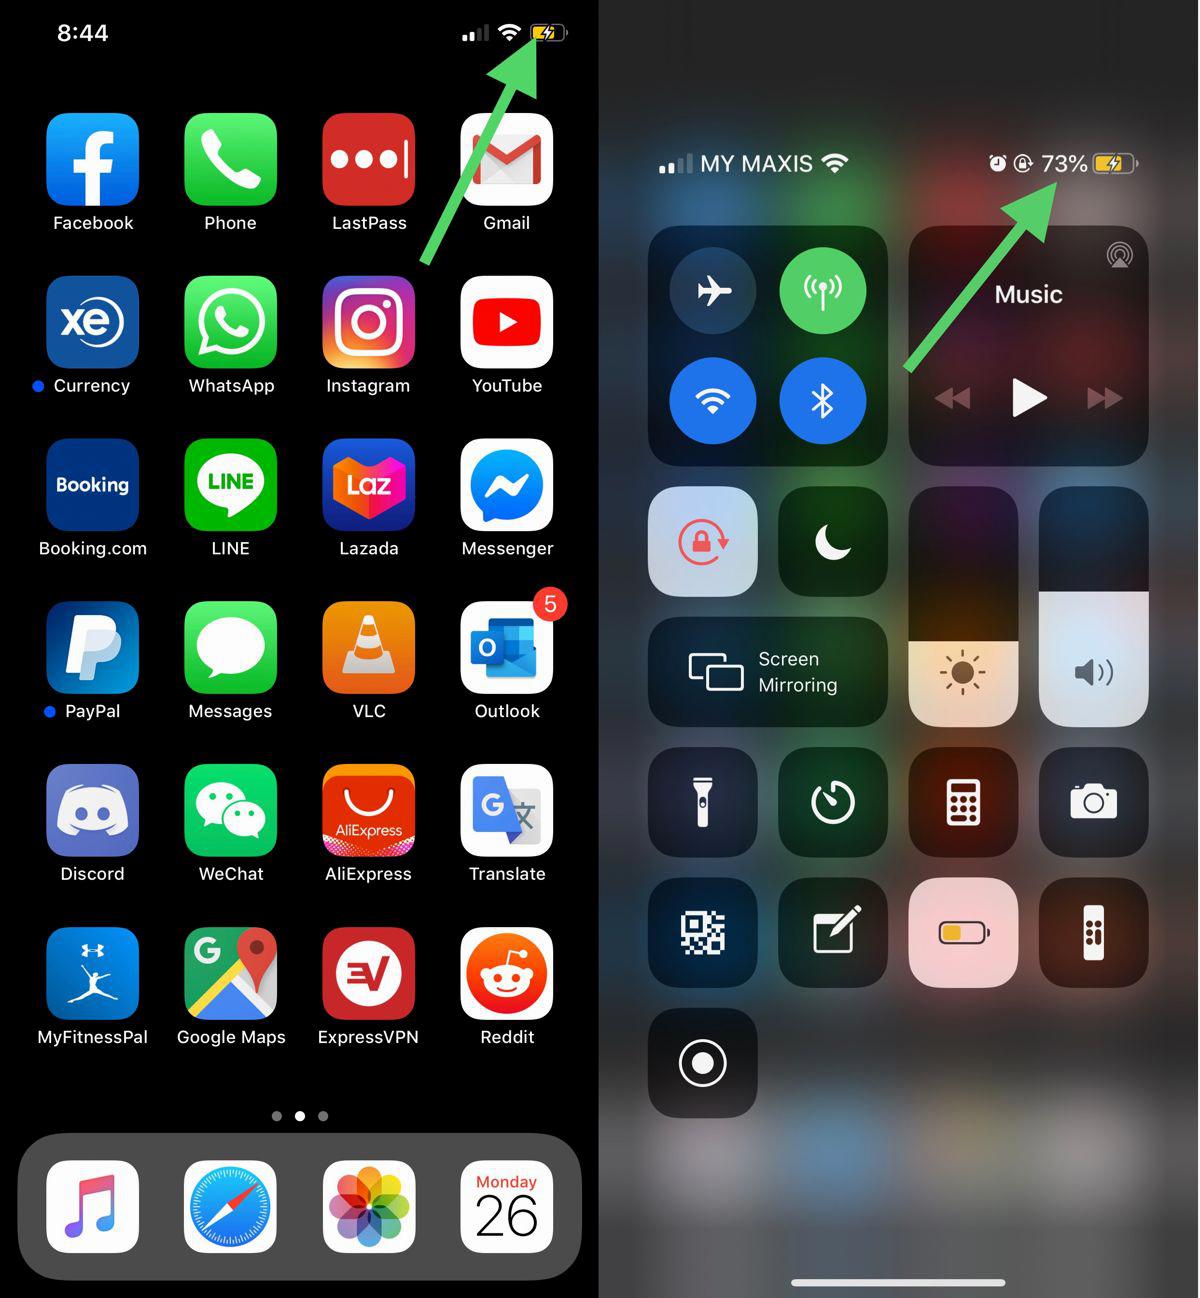 how to display battery percentage on iphone